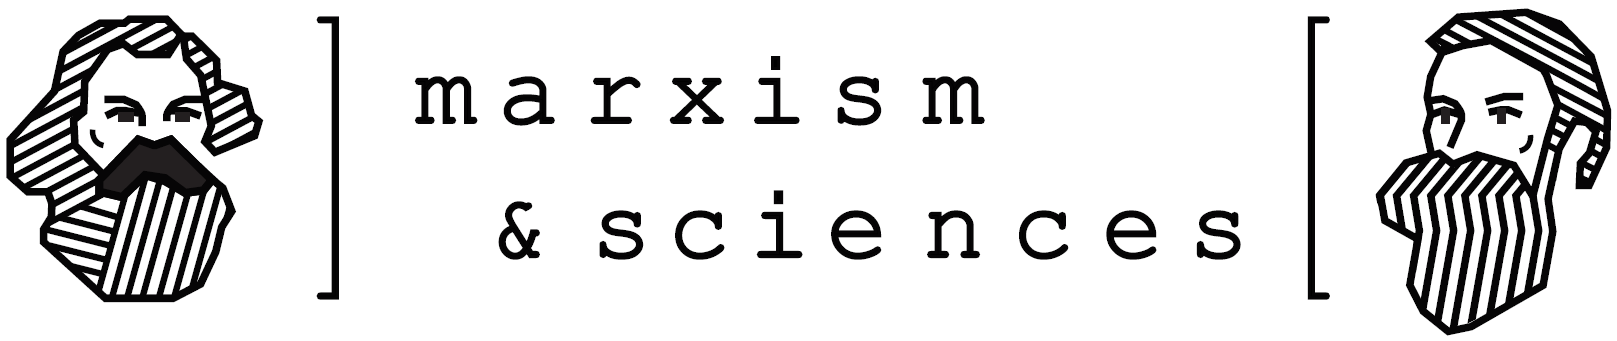 Marxism and Sciences